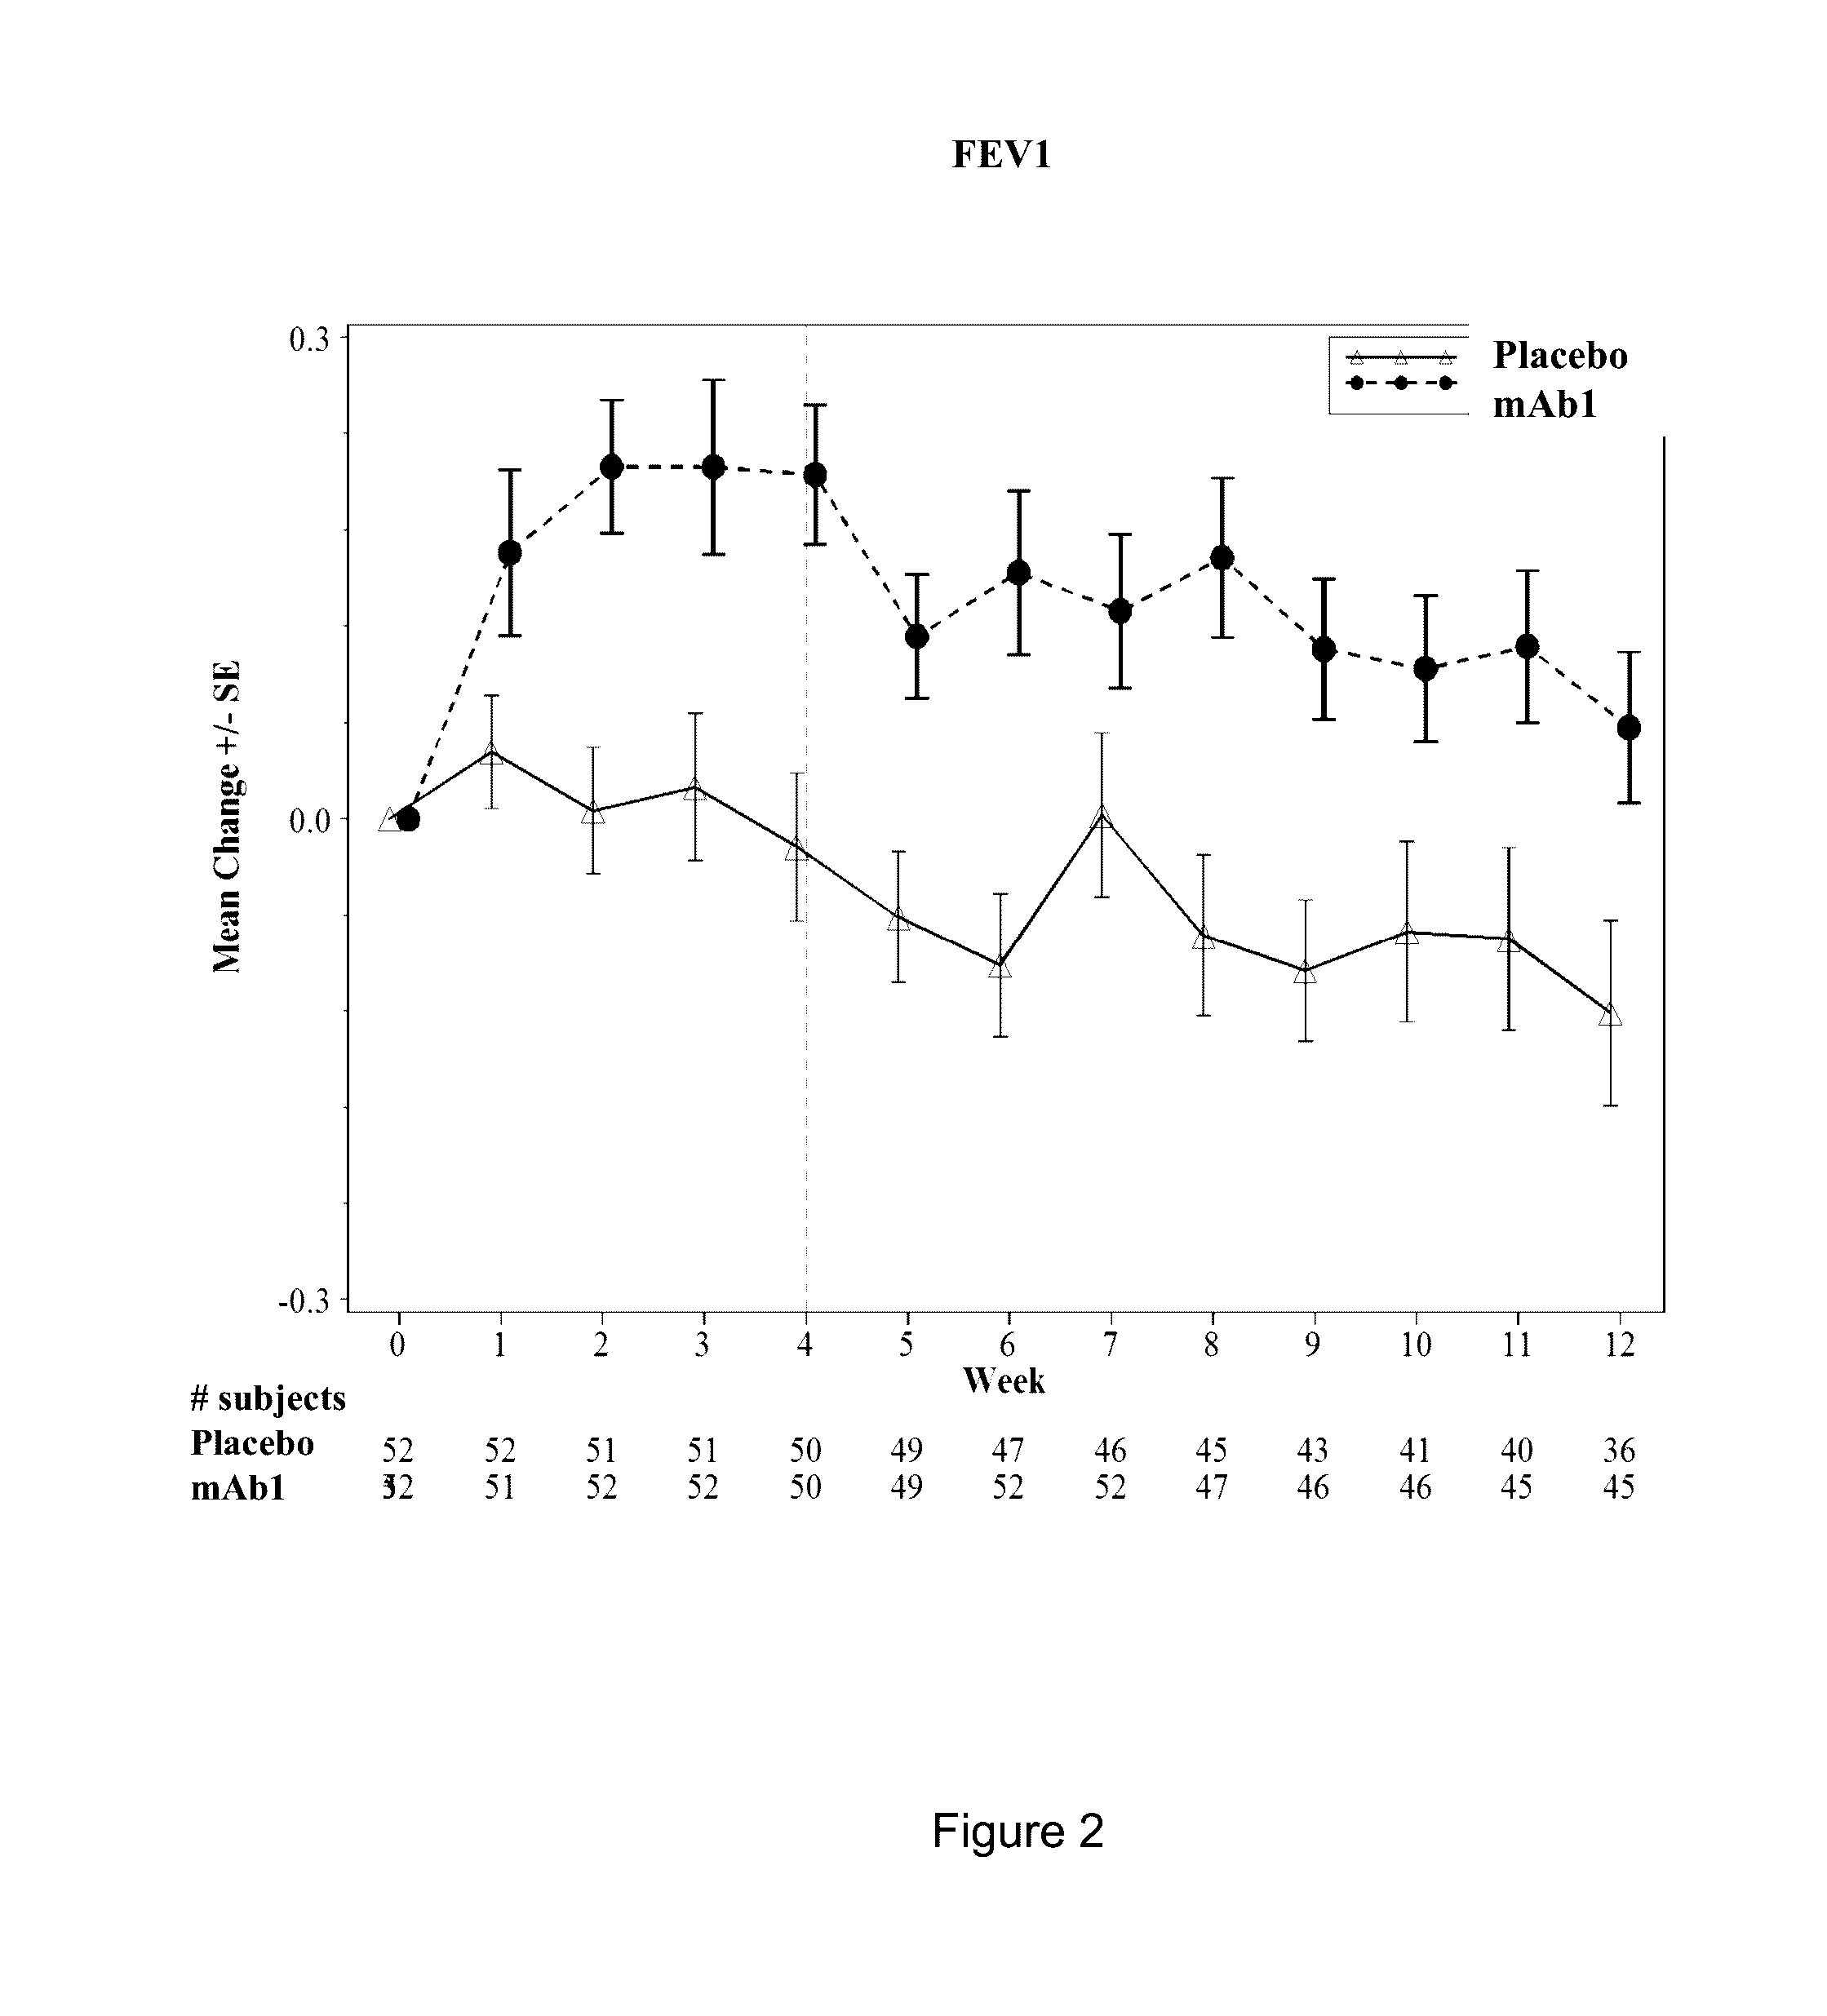 Methods for treating or preventing asthma by administering an IL-4R antagonist